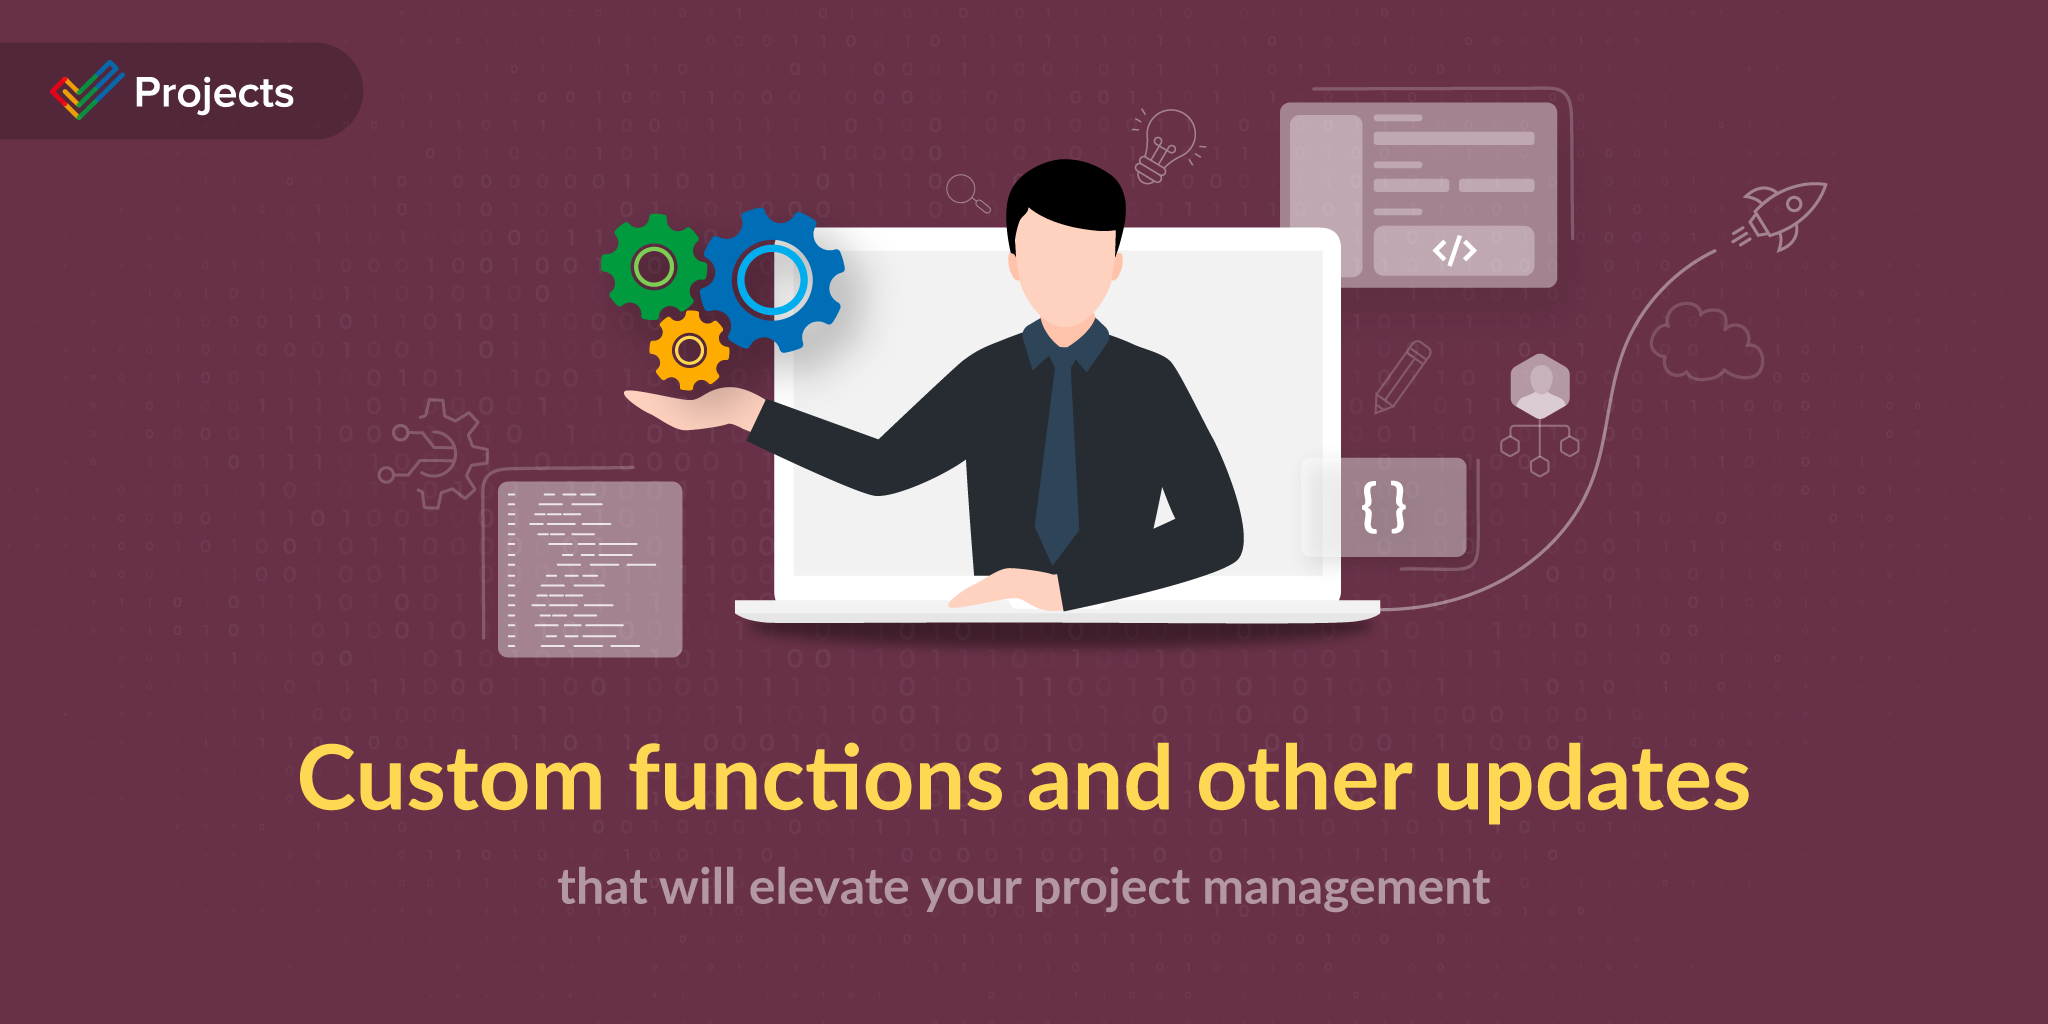 Latest feature updates to Zoho Projects making project management easier